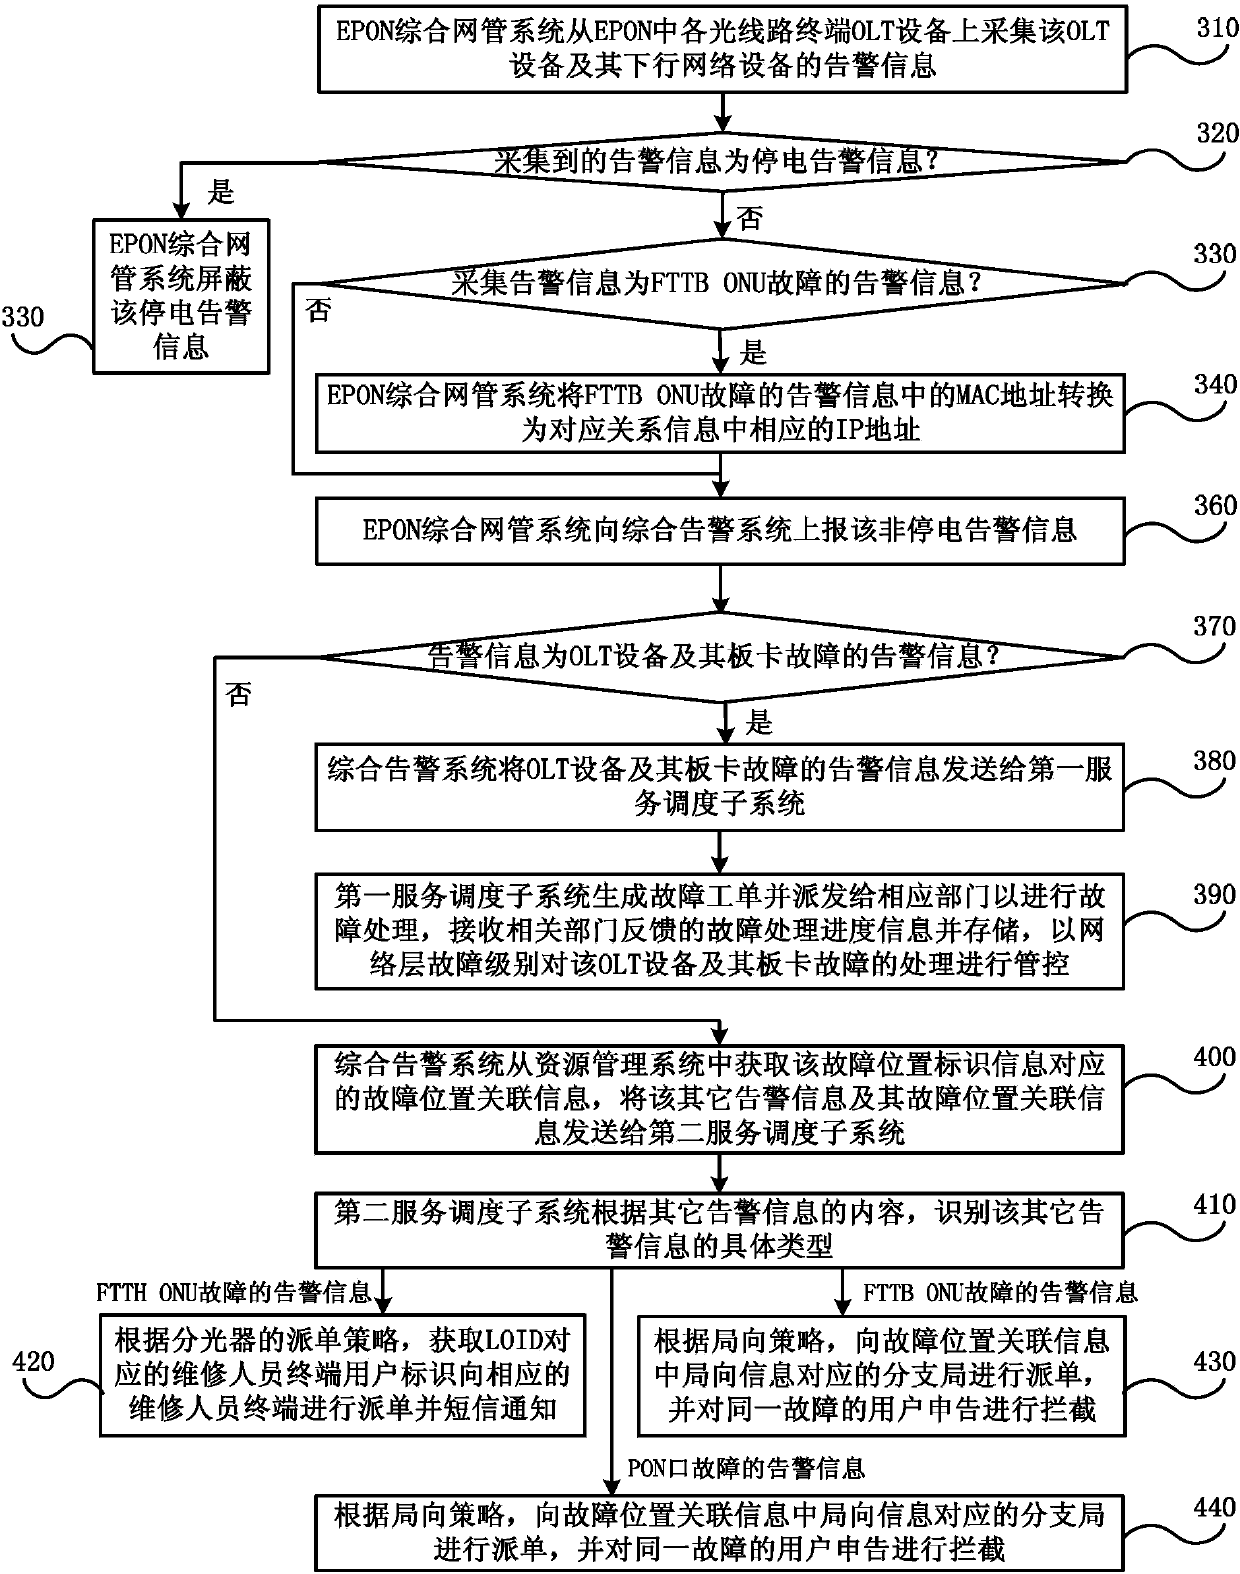 Alarm processing method and alarm processing system for Ethernet passive optical network (EPON)